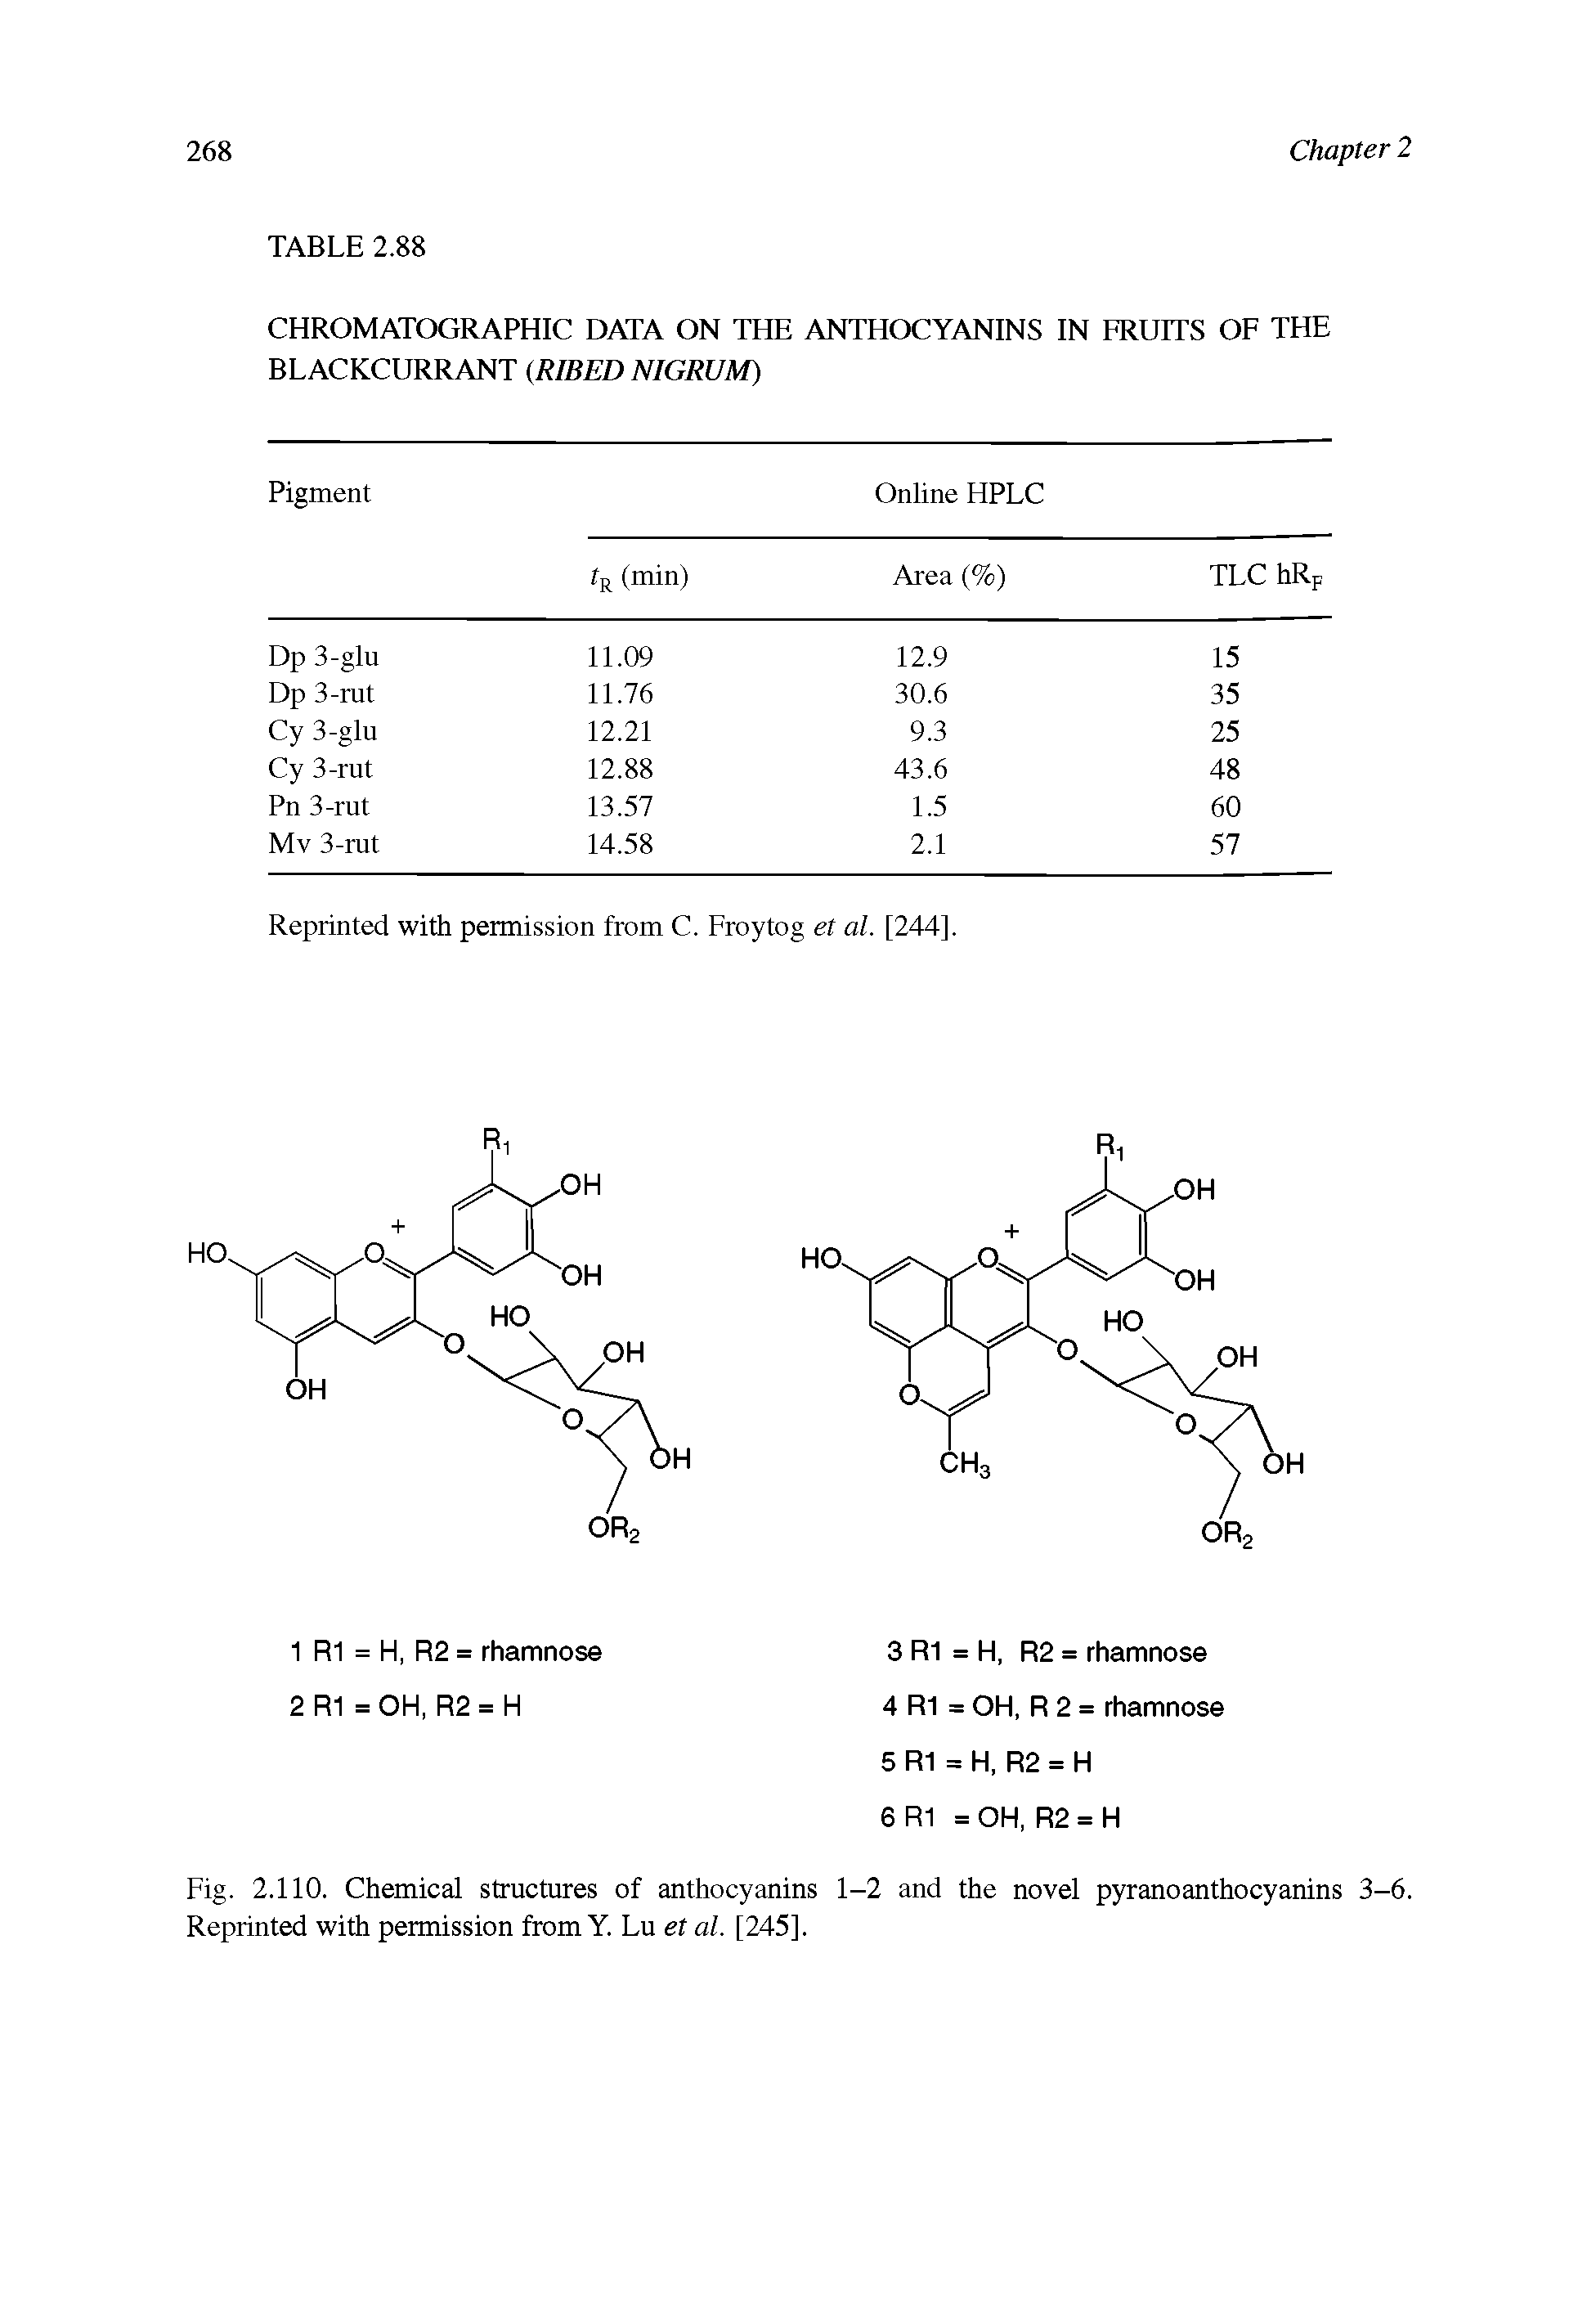 Fig. 2.110. Chemical structures of anthocyanins 1-2 and the novel pyranoanthocyanins 3-6. Reprinted with permission from Y. Lu et al. [245],...